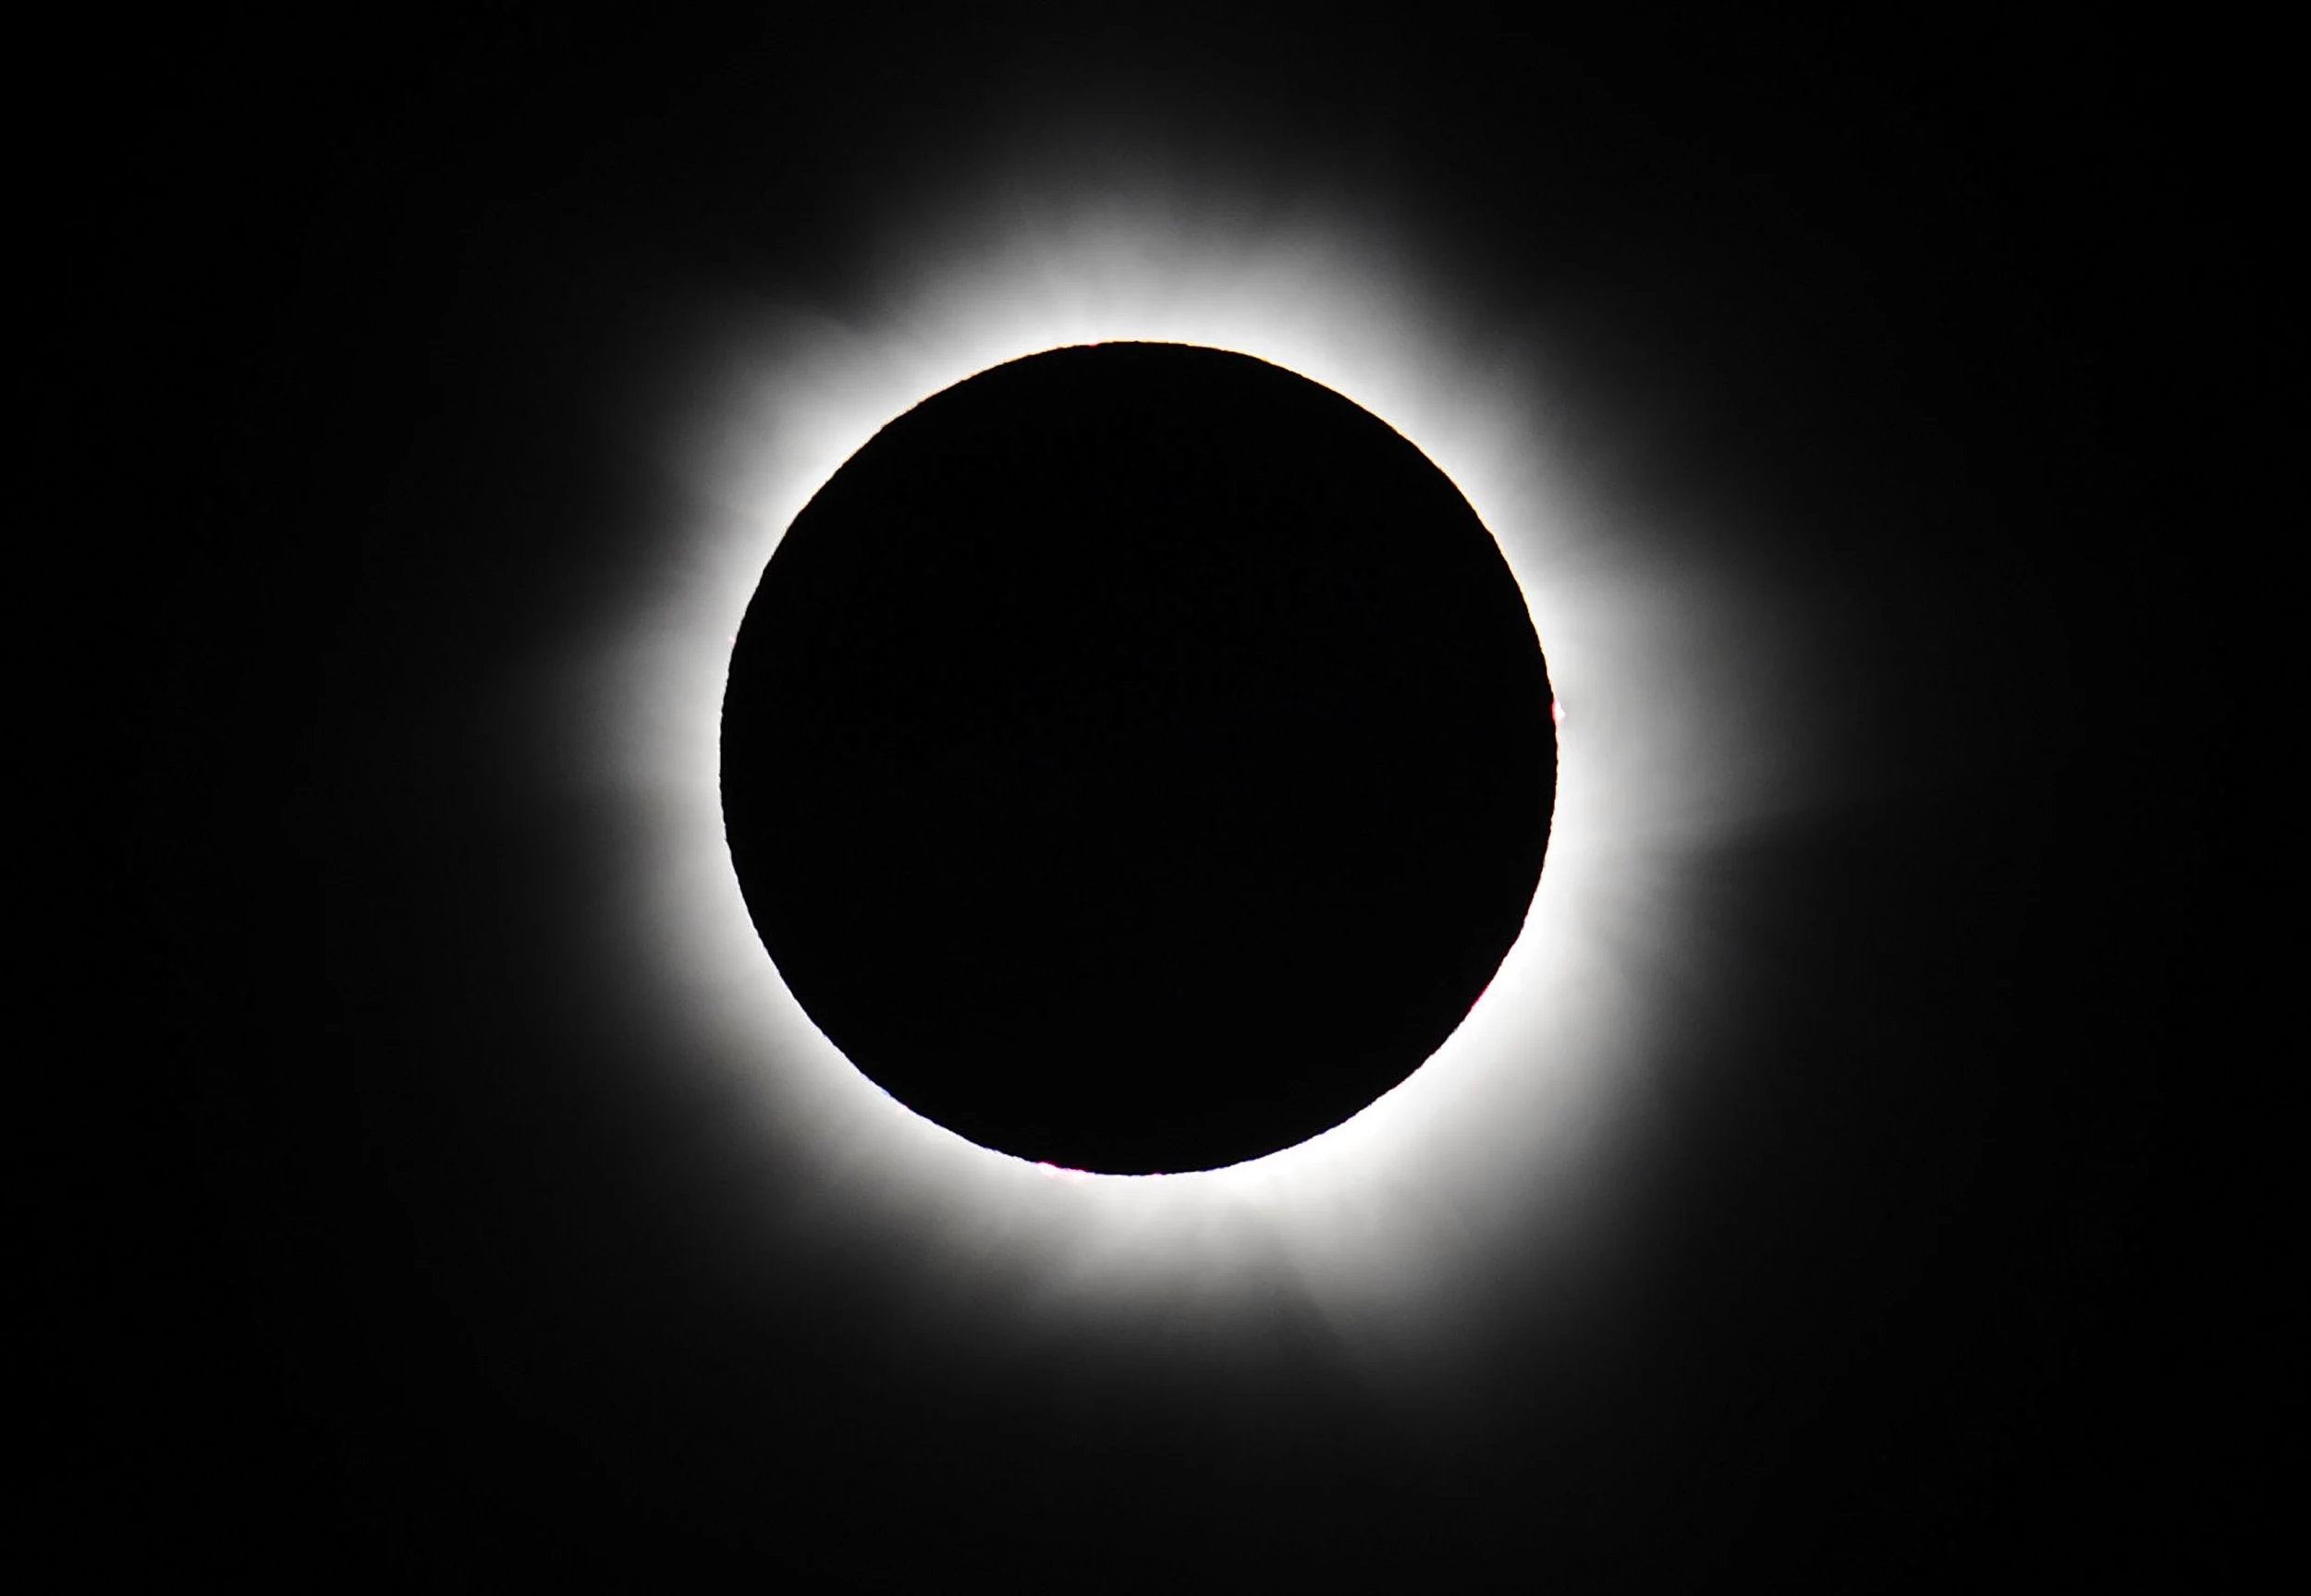 ring of fire eclipse